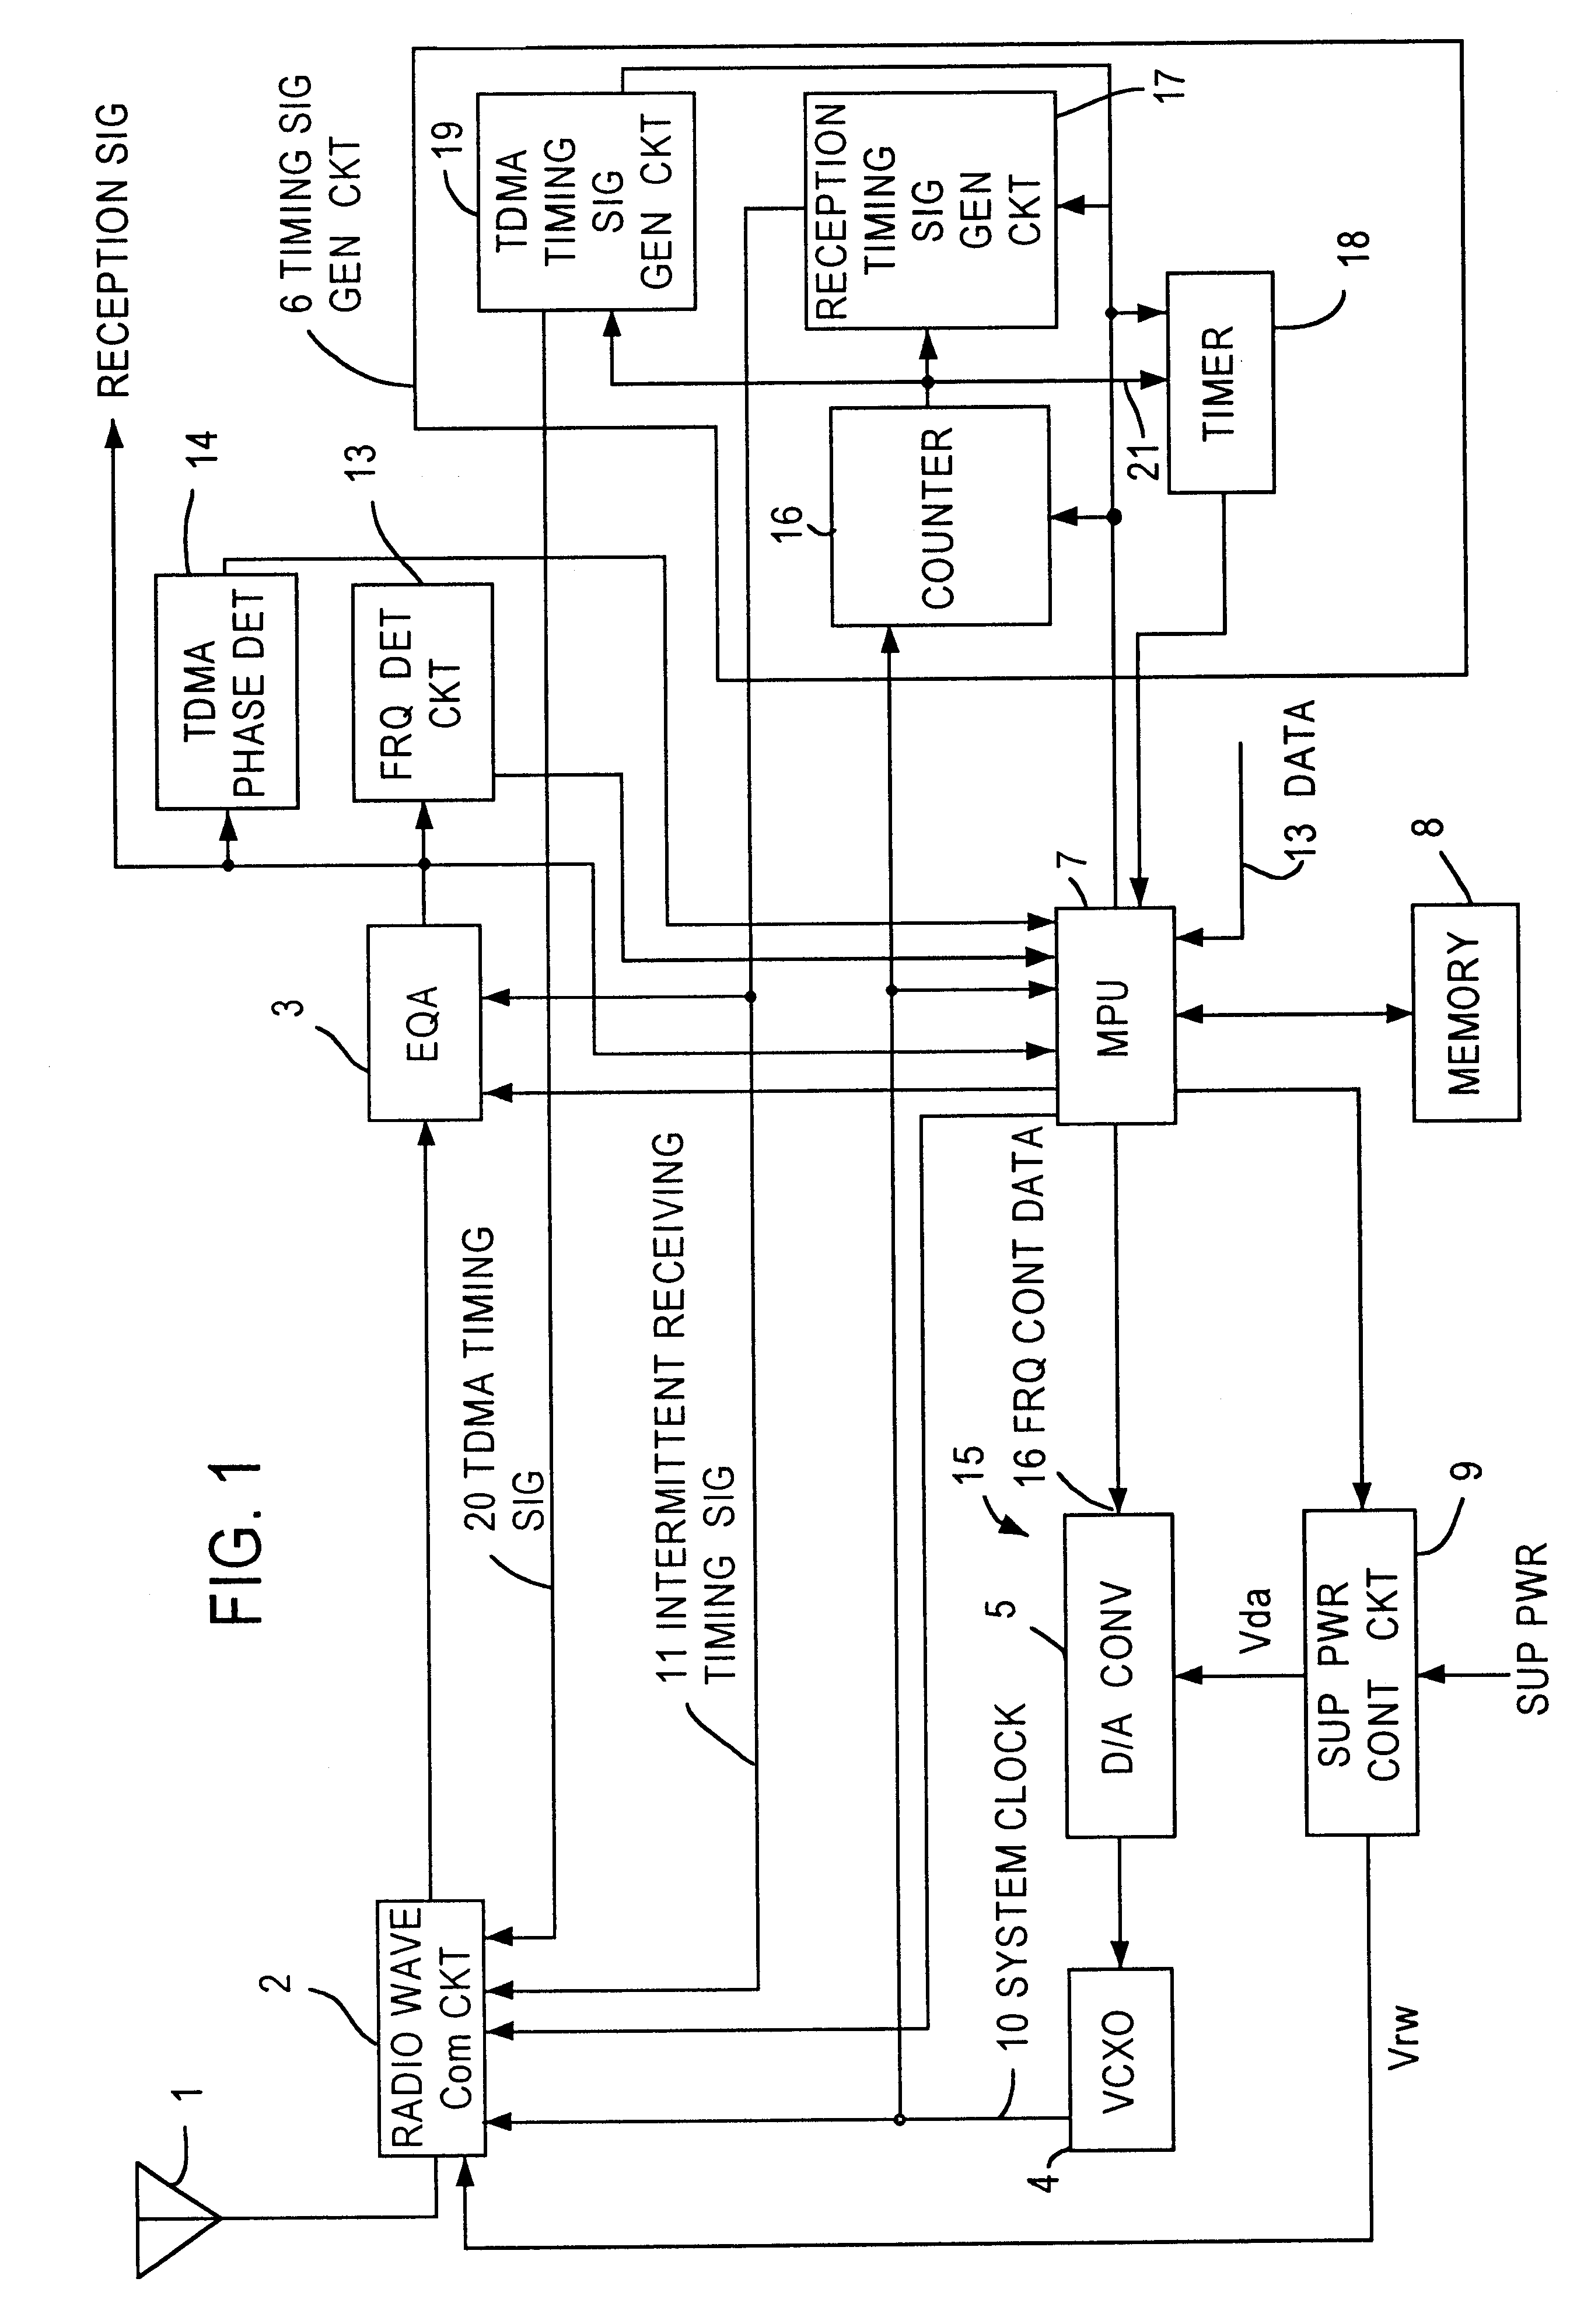 Receiving apparatus with intermittent receiving